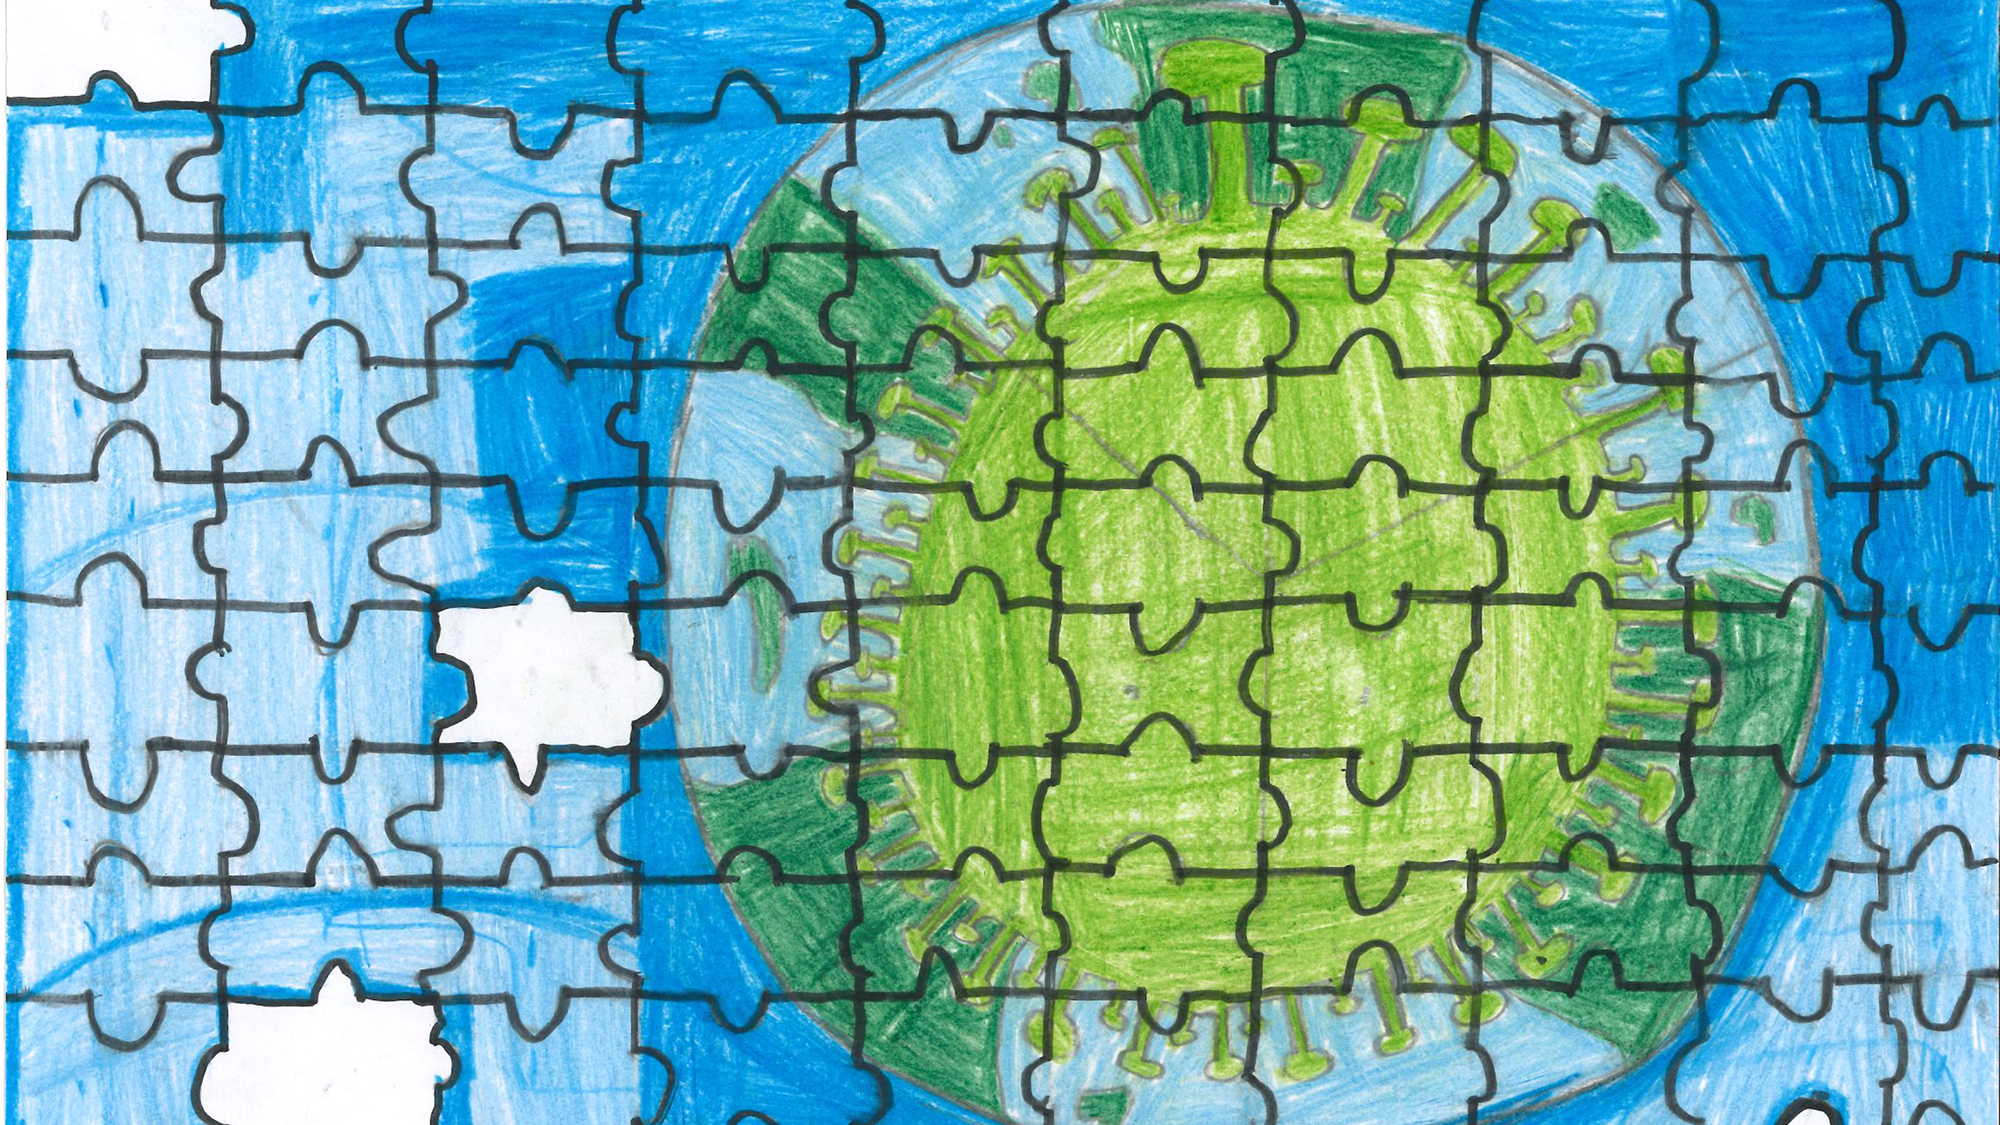 Children's drawing that mimics a puzzle showing a planet earth in the shape of a coronavirus. The puzzle is missing pieces.